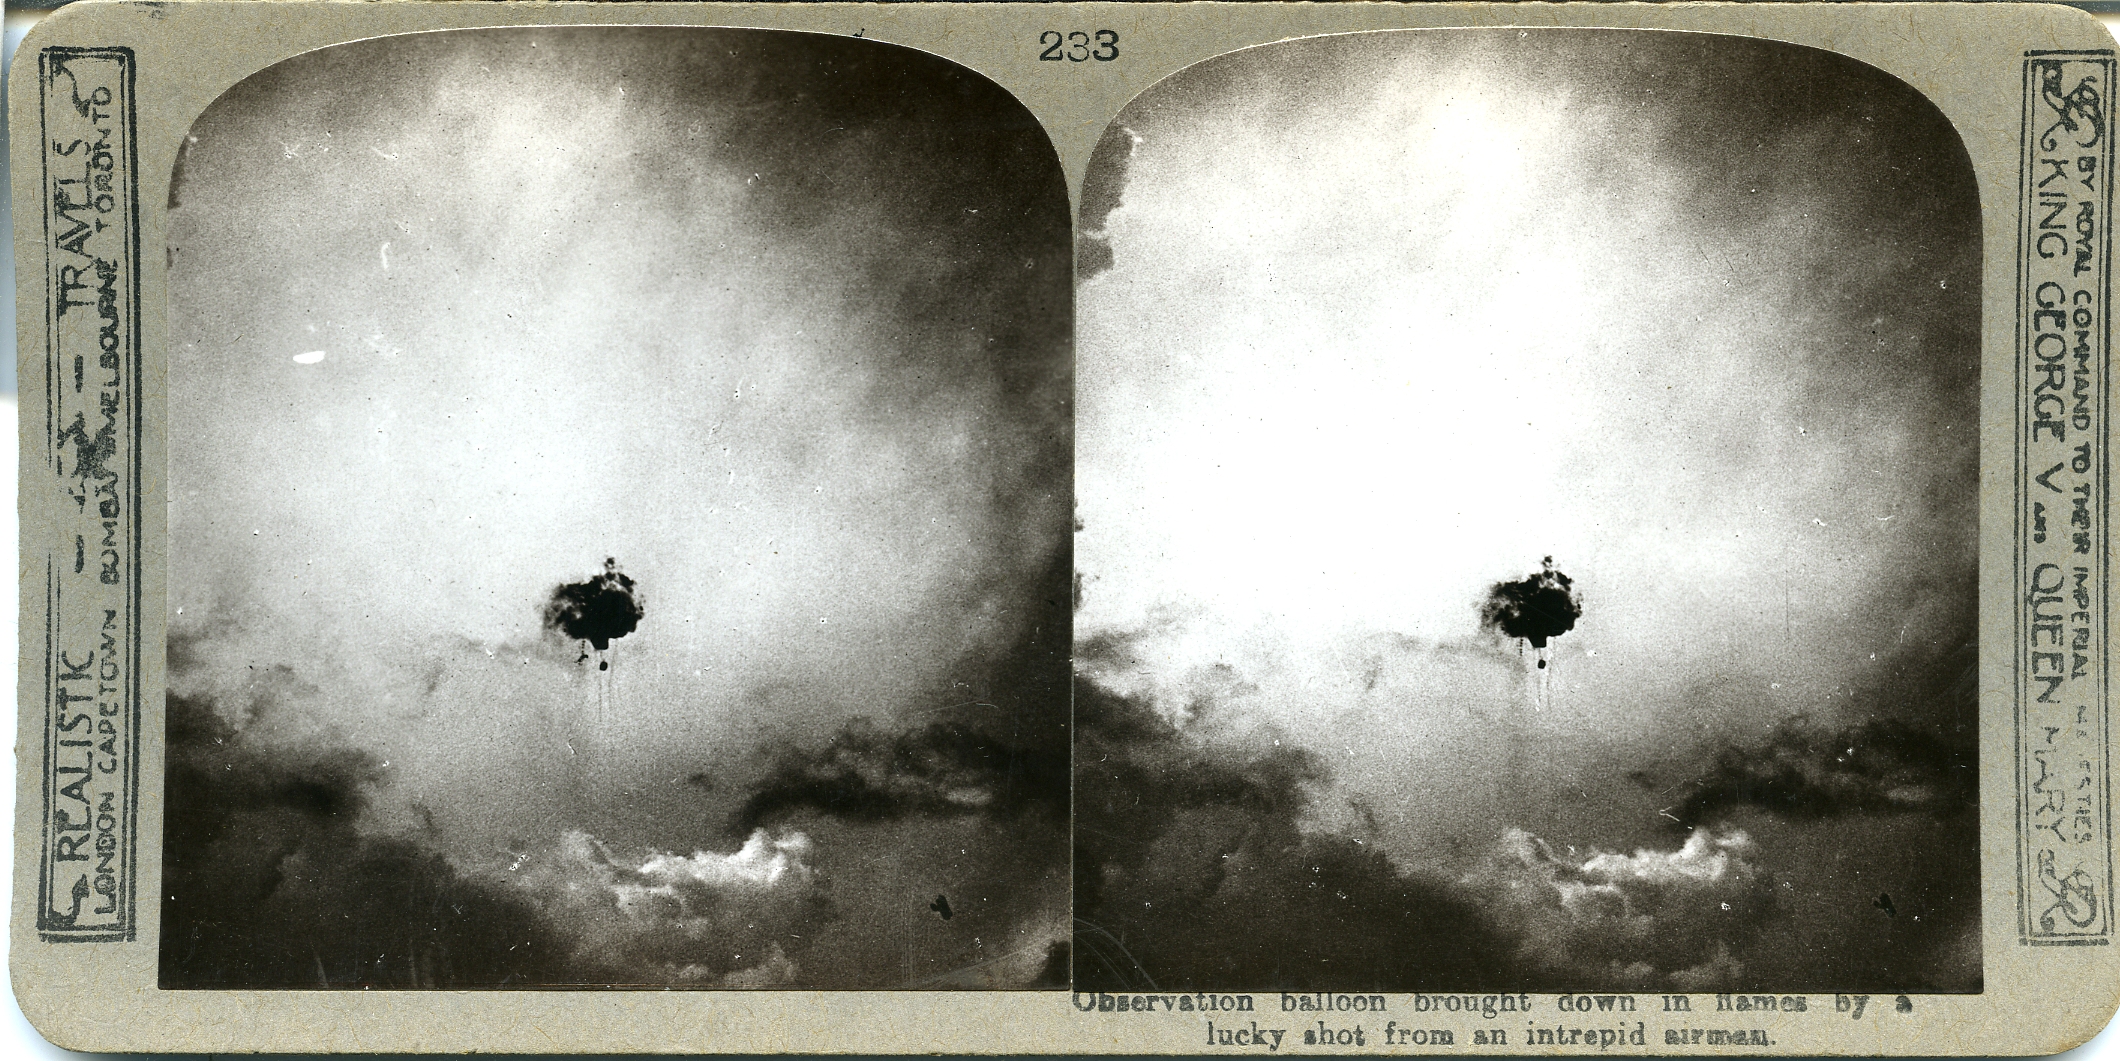 Observation balloon brought down in flames by a lucky shot from an intrepid airman